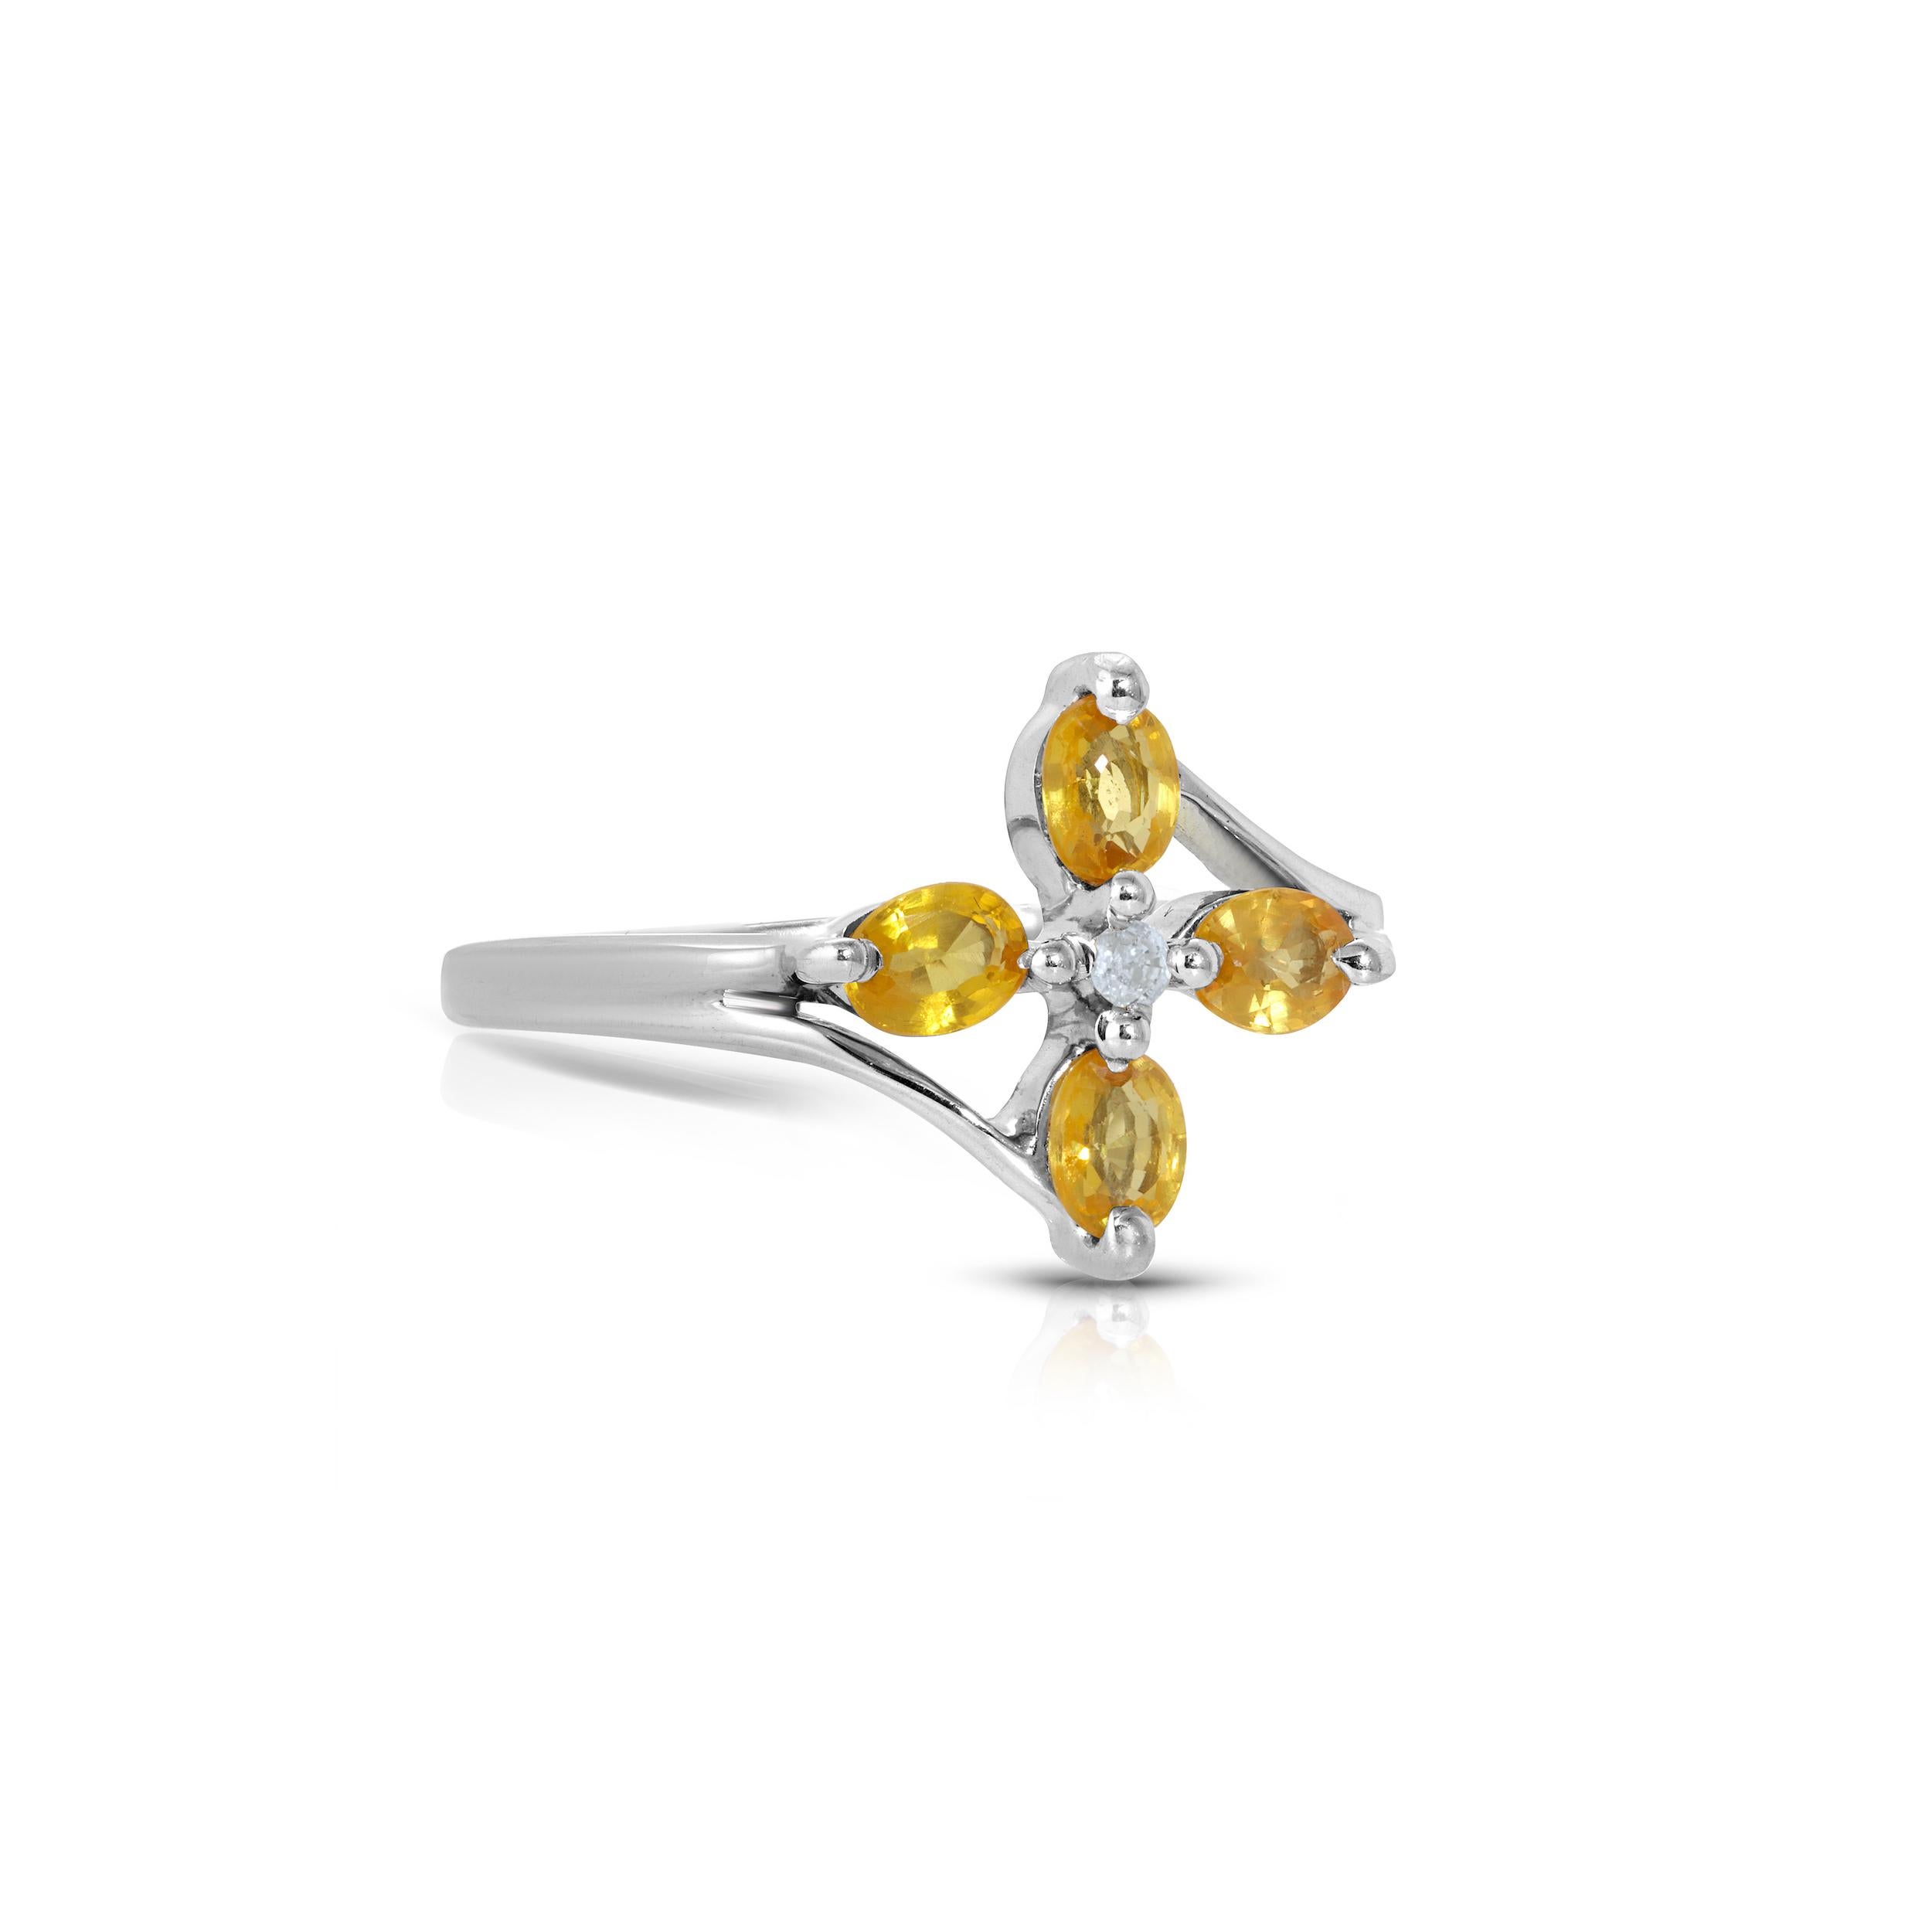 A cocktail ring in a modern flower design featuring a mix of gemstones. This beautiful ring features Four oval cut yellow Sapphires with a total Carat weight of .92 set around a .03 Carat center Diamond. This ring is set in 18 Karat White Gold